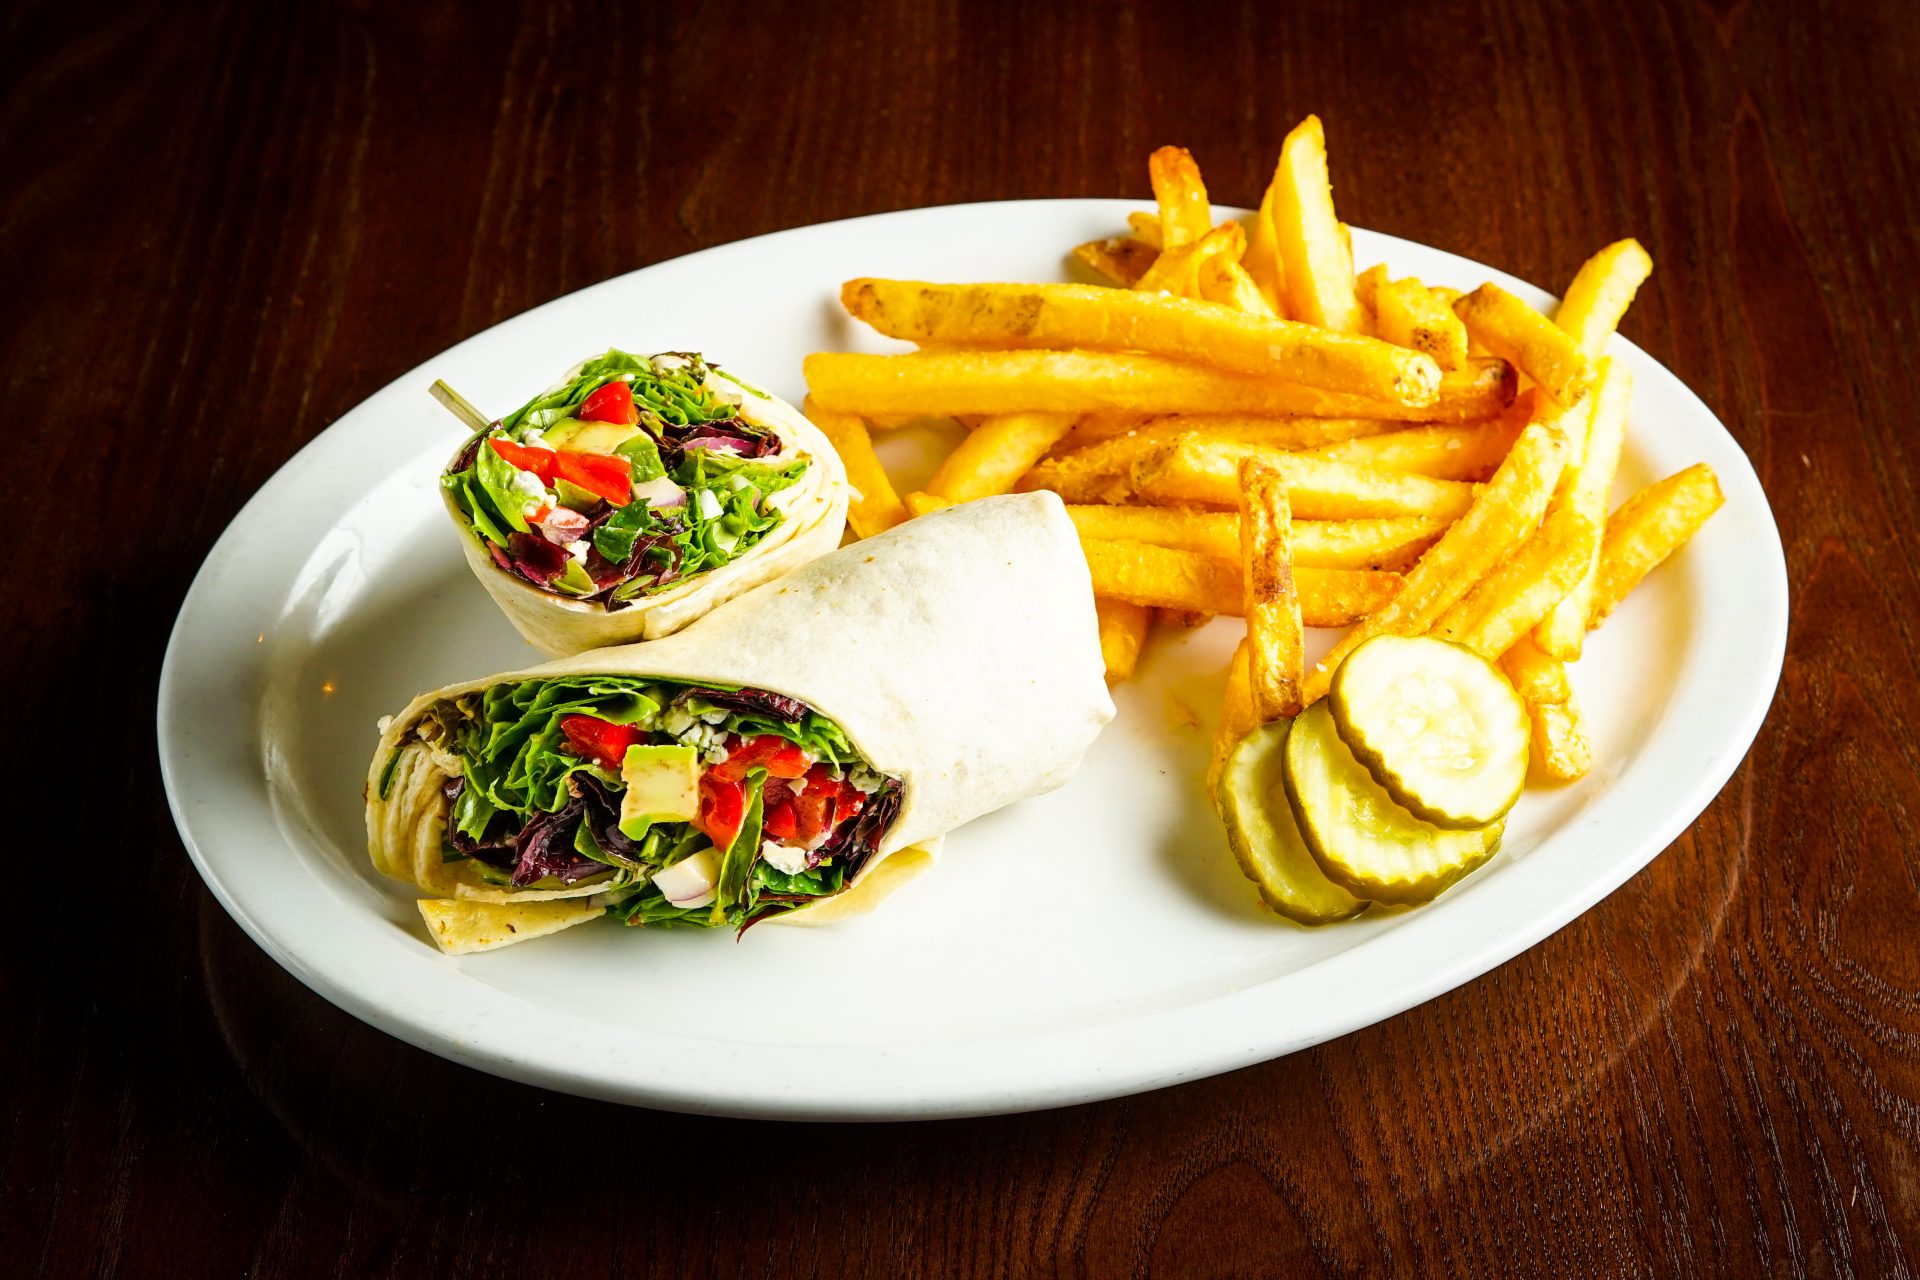 Image of California Wrap - Avocado, Red Onion, Roasted Red Pepper, Bleu Cheese, Mixed Greens dressed with Champagne Vinaigrette, Flour Tortilla